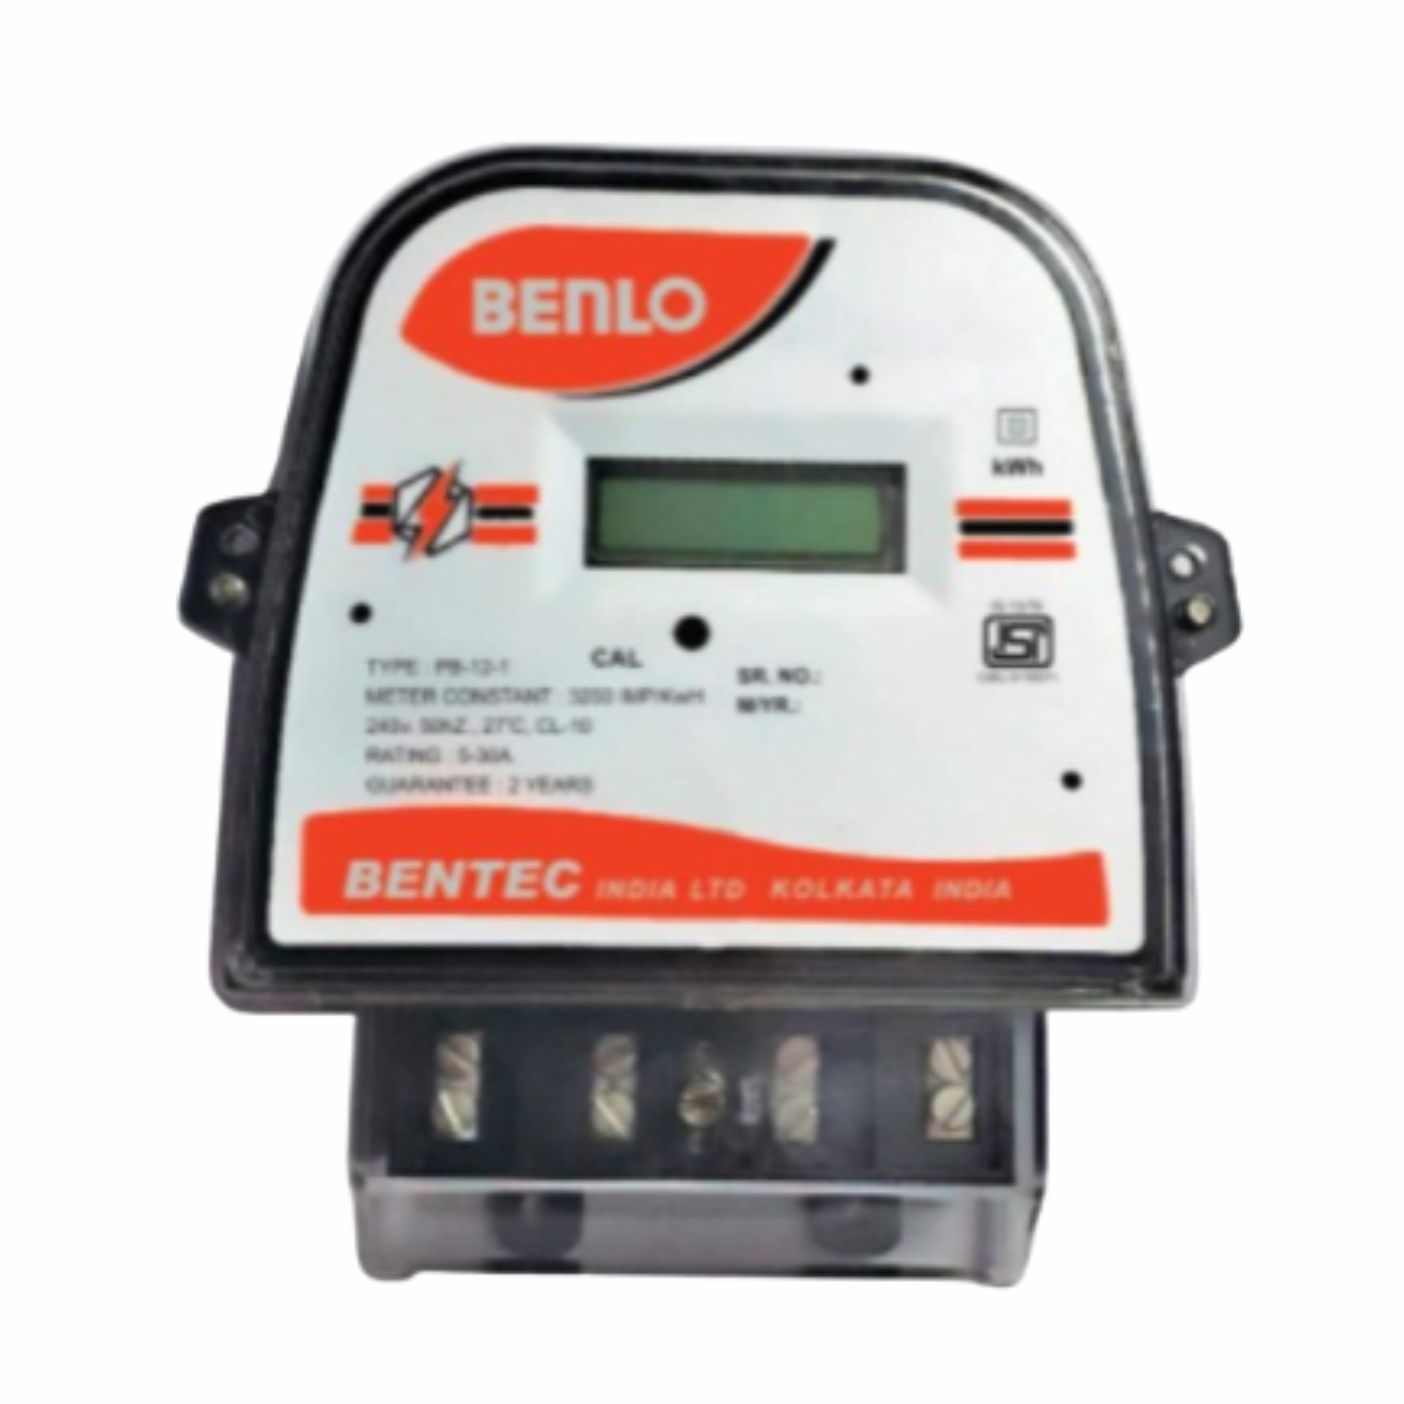 BENLO STATIC KWH METER AC SINGLE PHASE 2 WIRE LCD TYPE METER